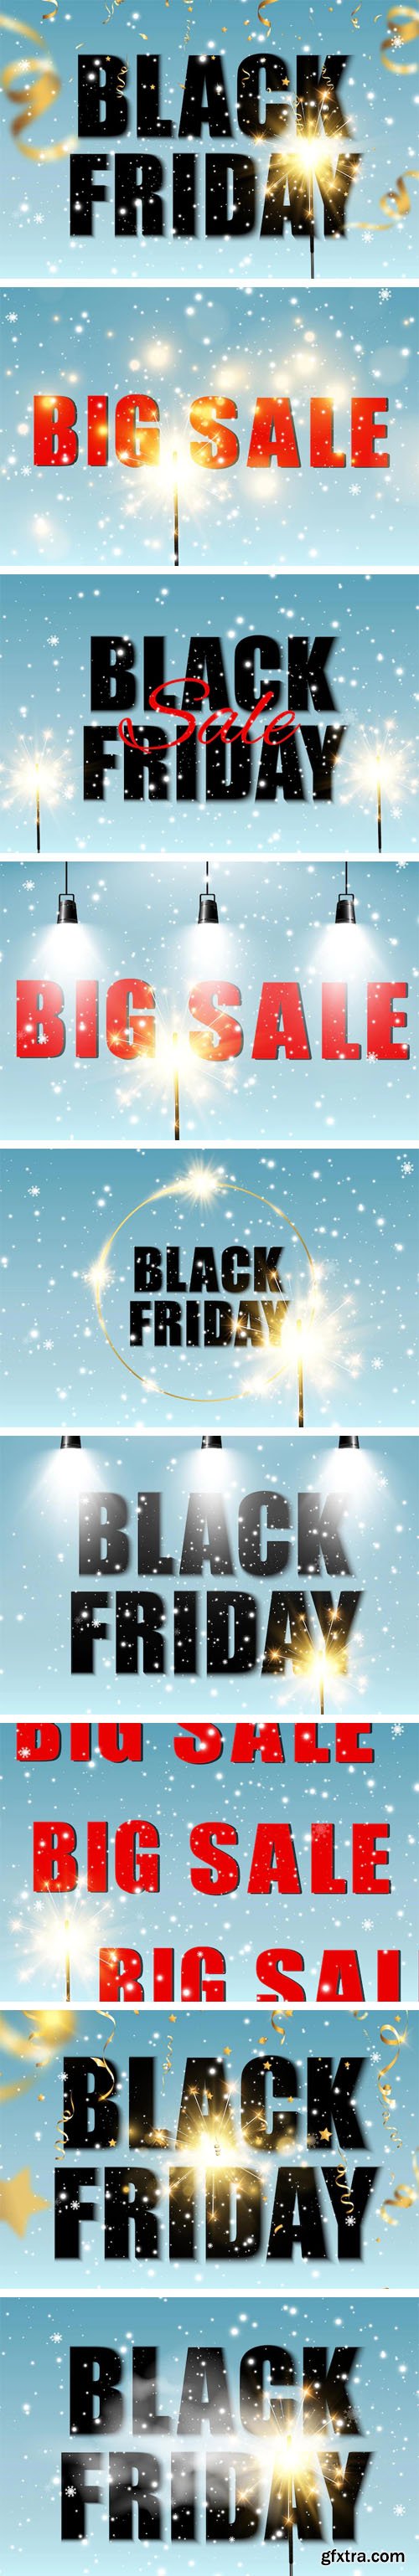 Black Friday - 9 Clearance Sales Backgrounds Vector Templates